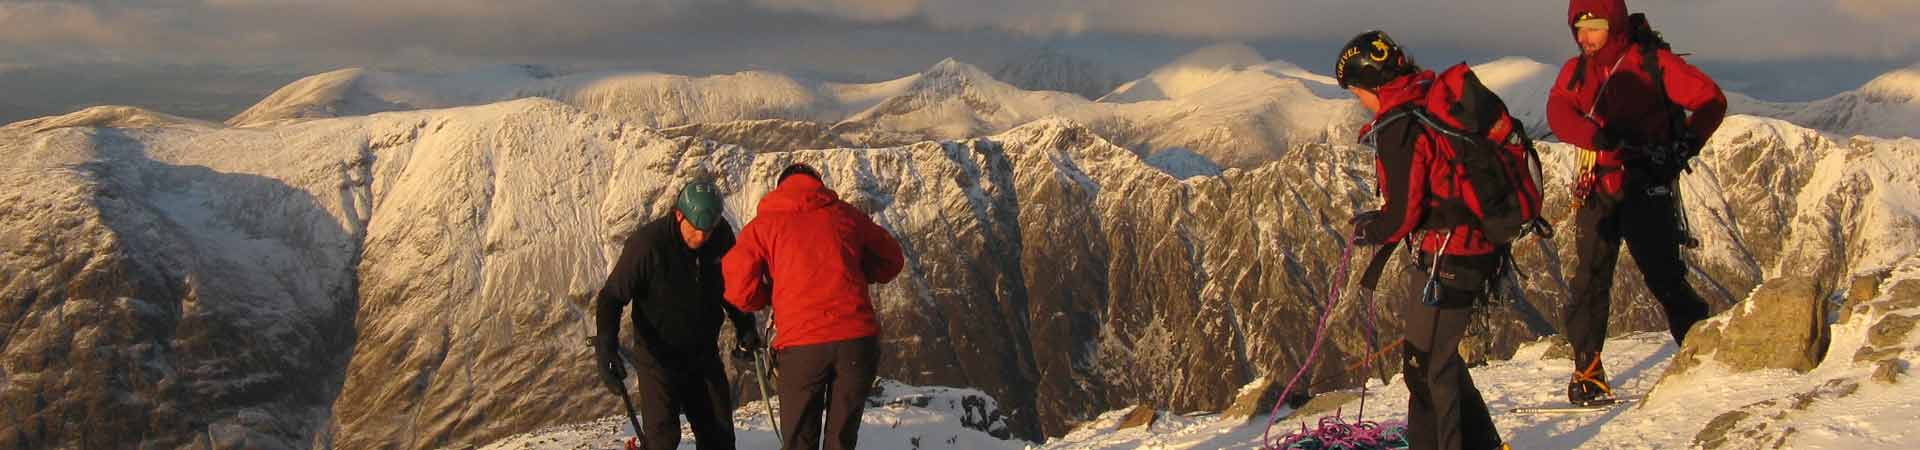 Four students mountaineering in the Scottish Highlands during winter with snow covered mountains behind them.